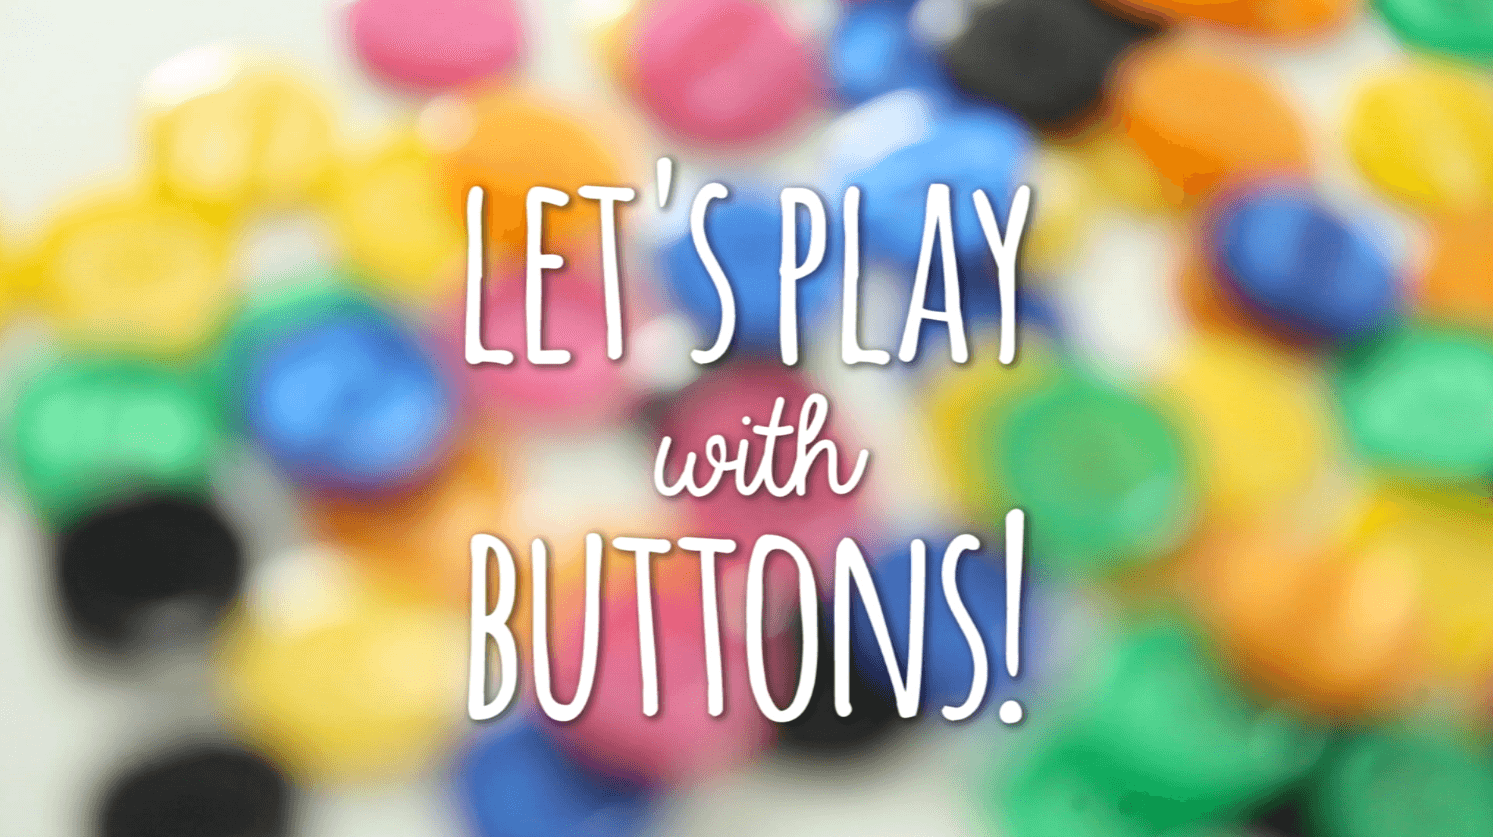 DIY: Let's Play with Buttons!